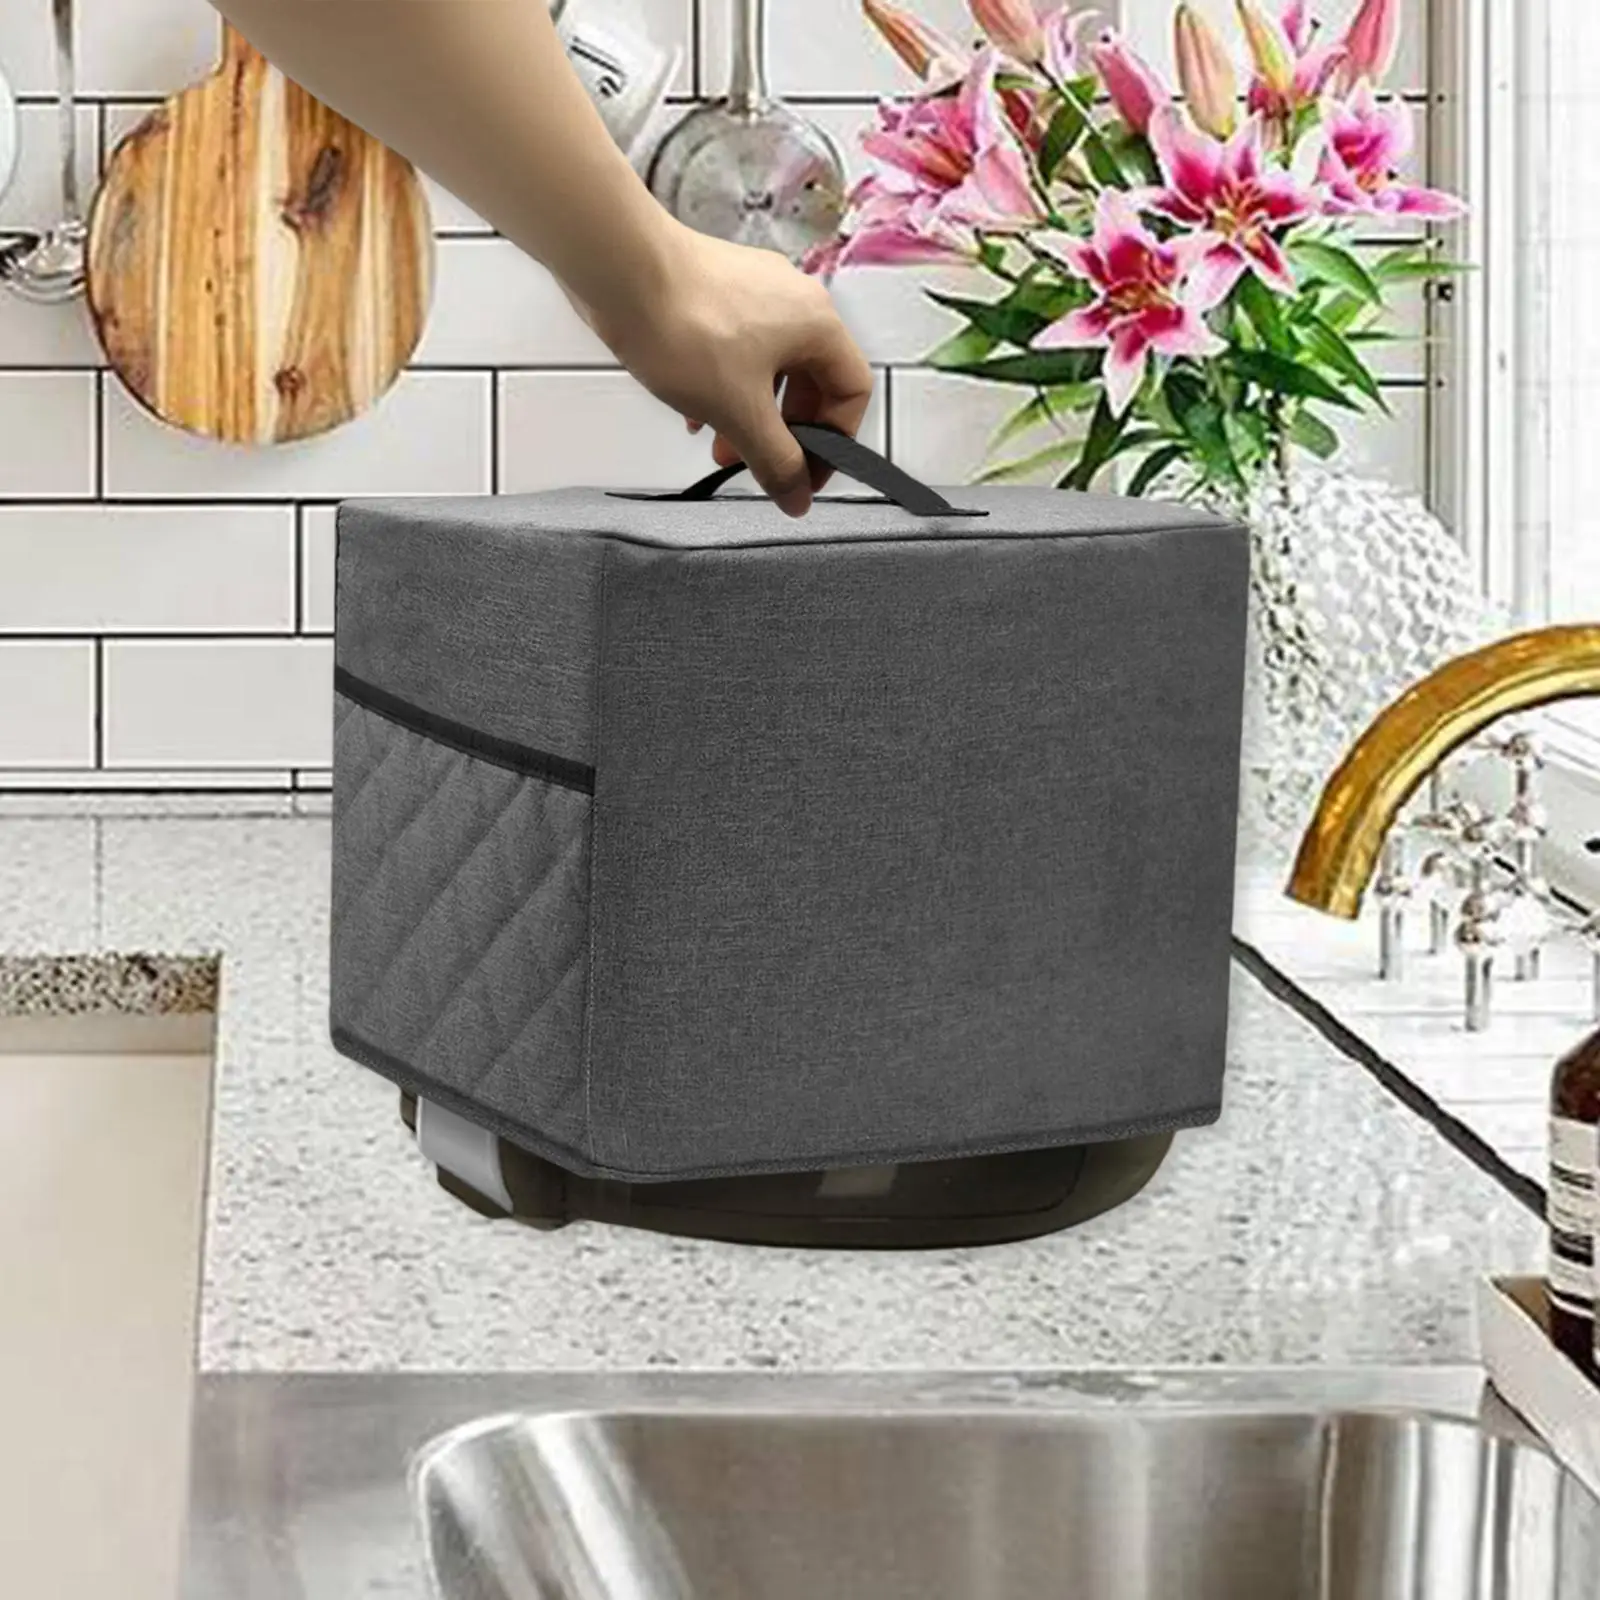 Saving Time, Air Fryer Dust Cover, W/ 2 Pockets Grilling Storage Pockets Pan Safe Kitchen Applicants, Overlocker, for Camping